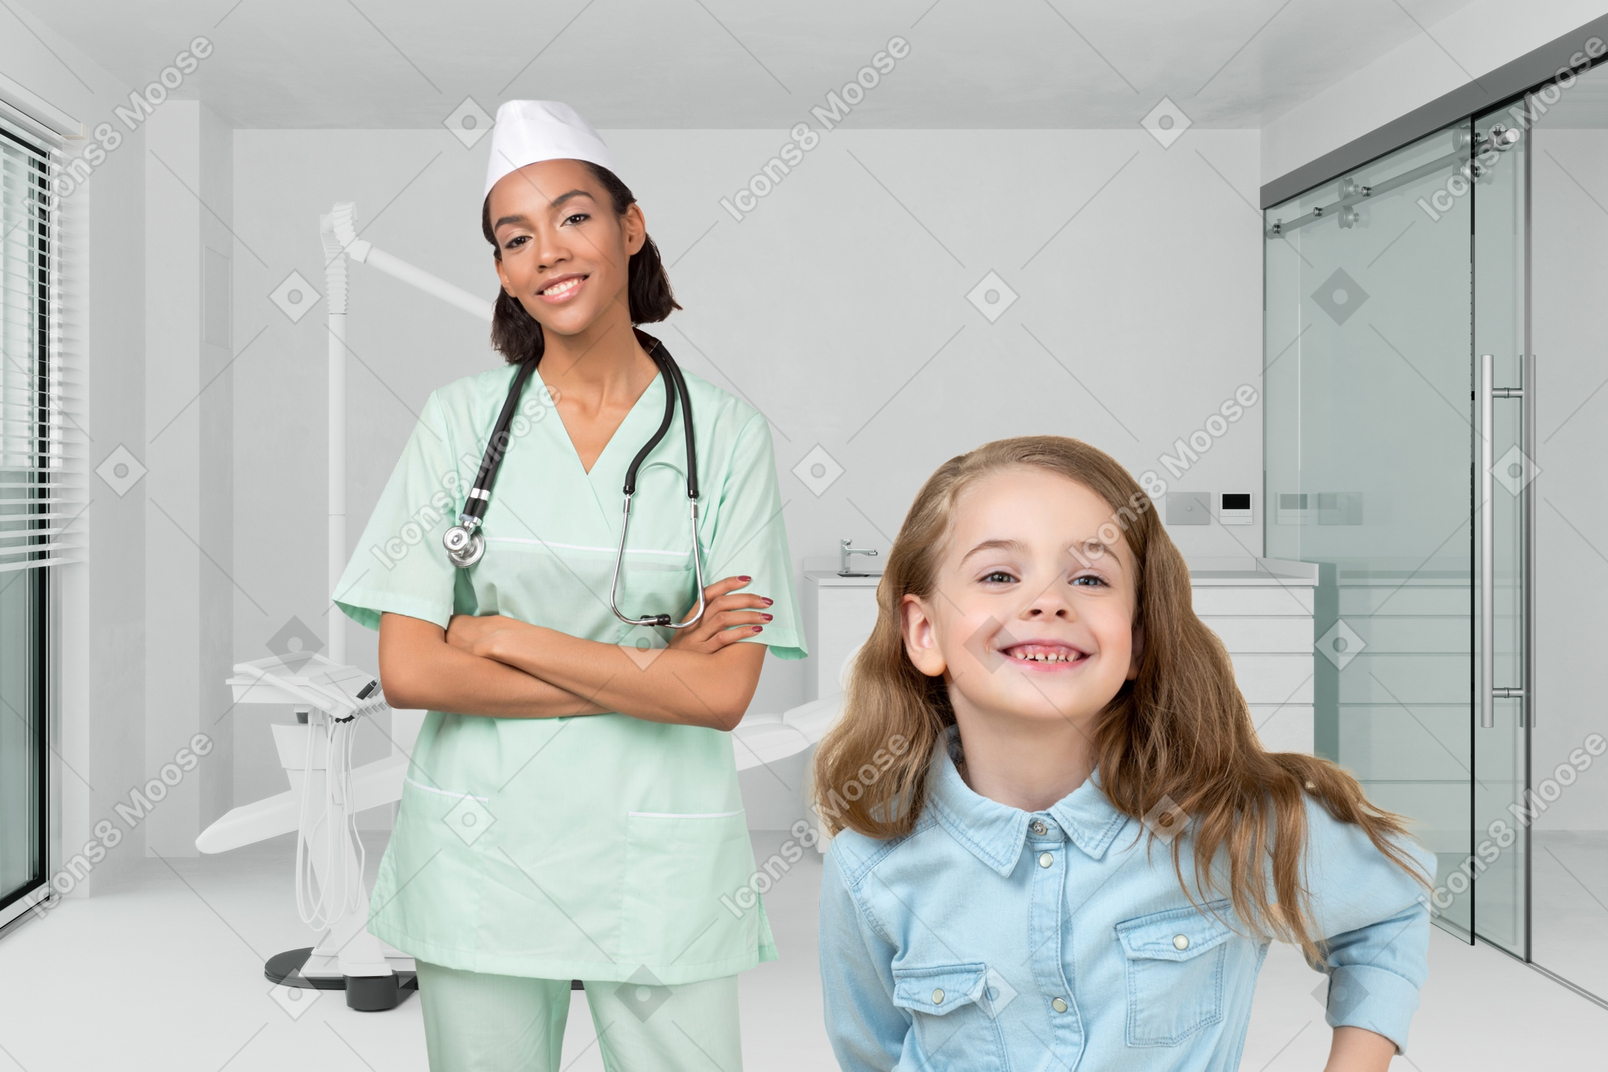 Smiling doctor and patient in the hospital